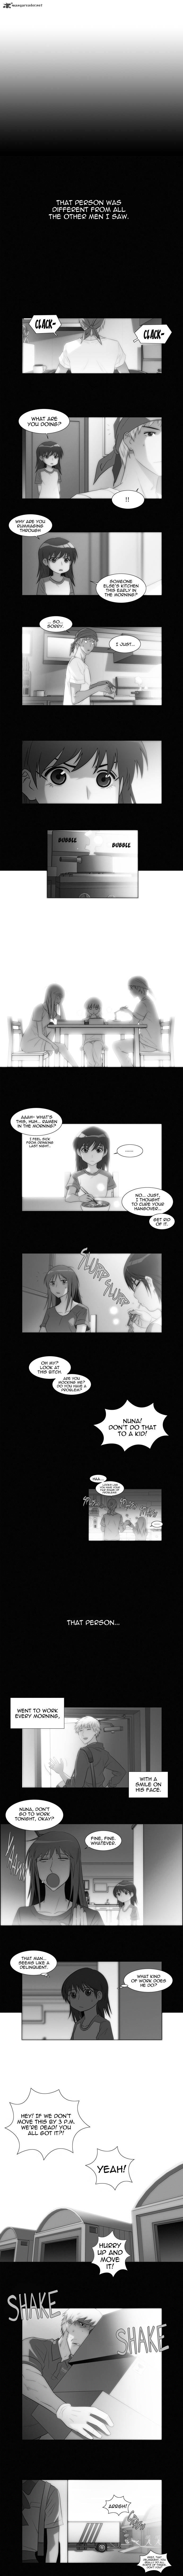 Melo Holic Chapter 41 Page 1